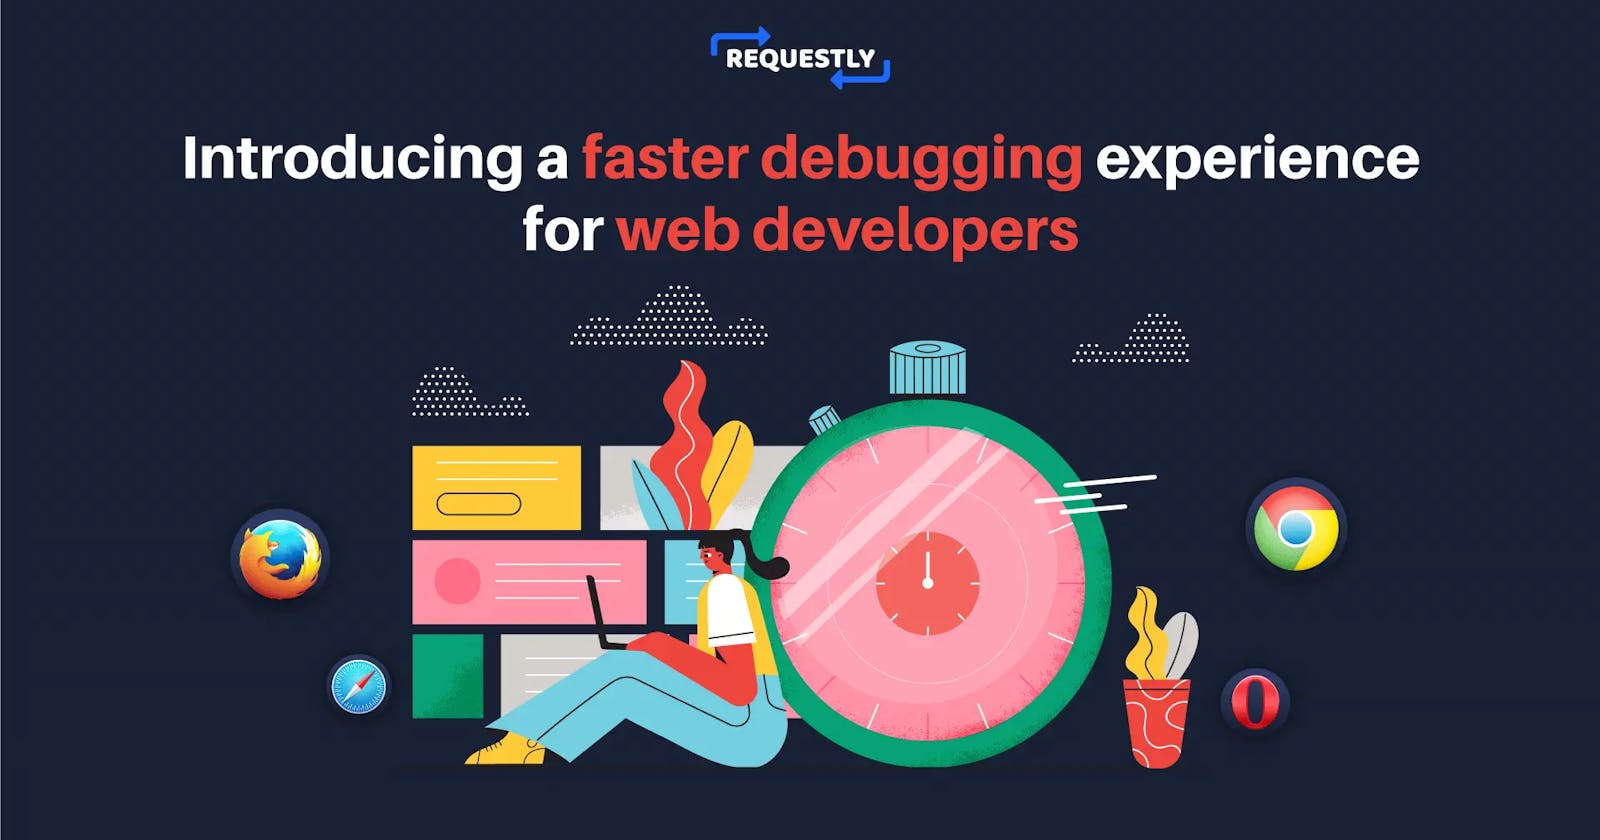 Introducing a faster debugging experience for web developers